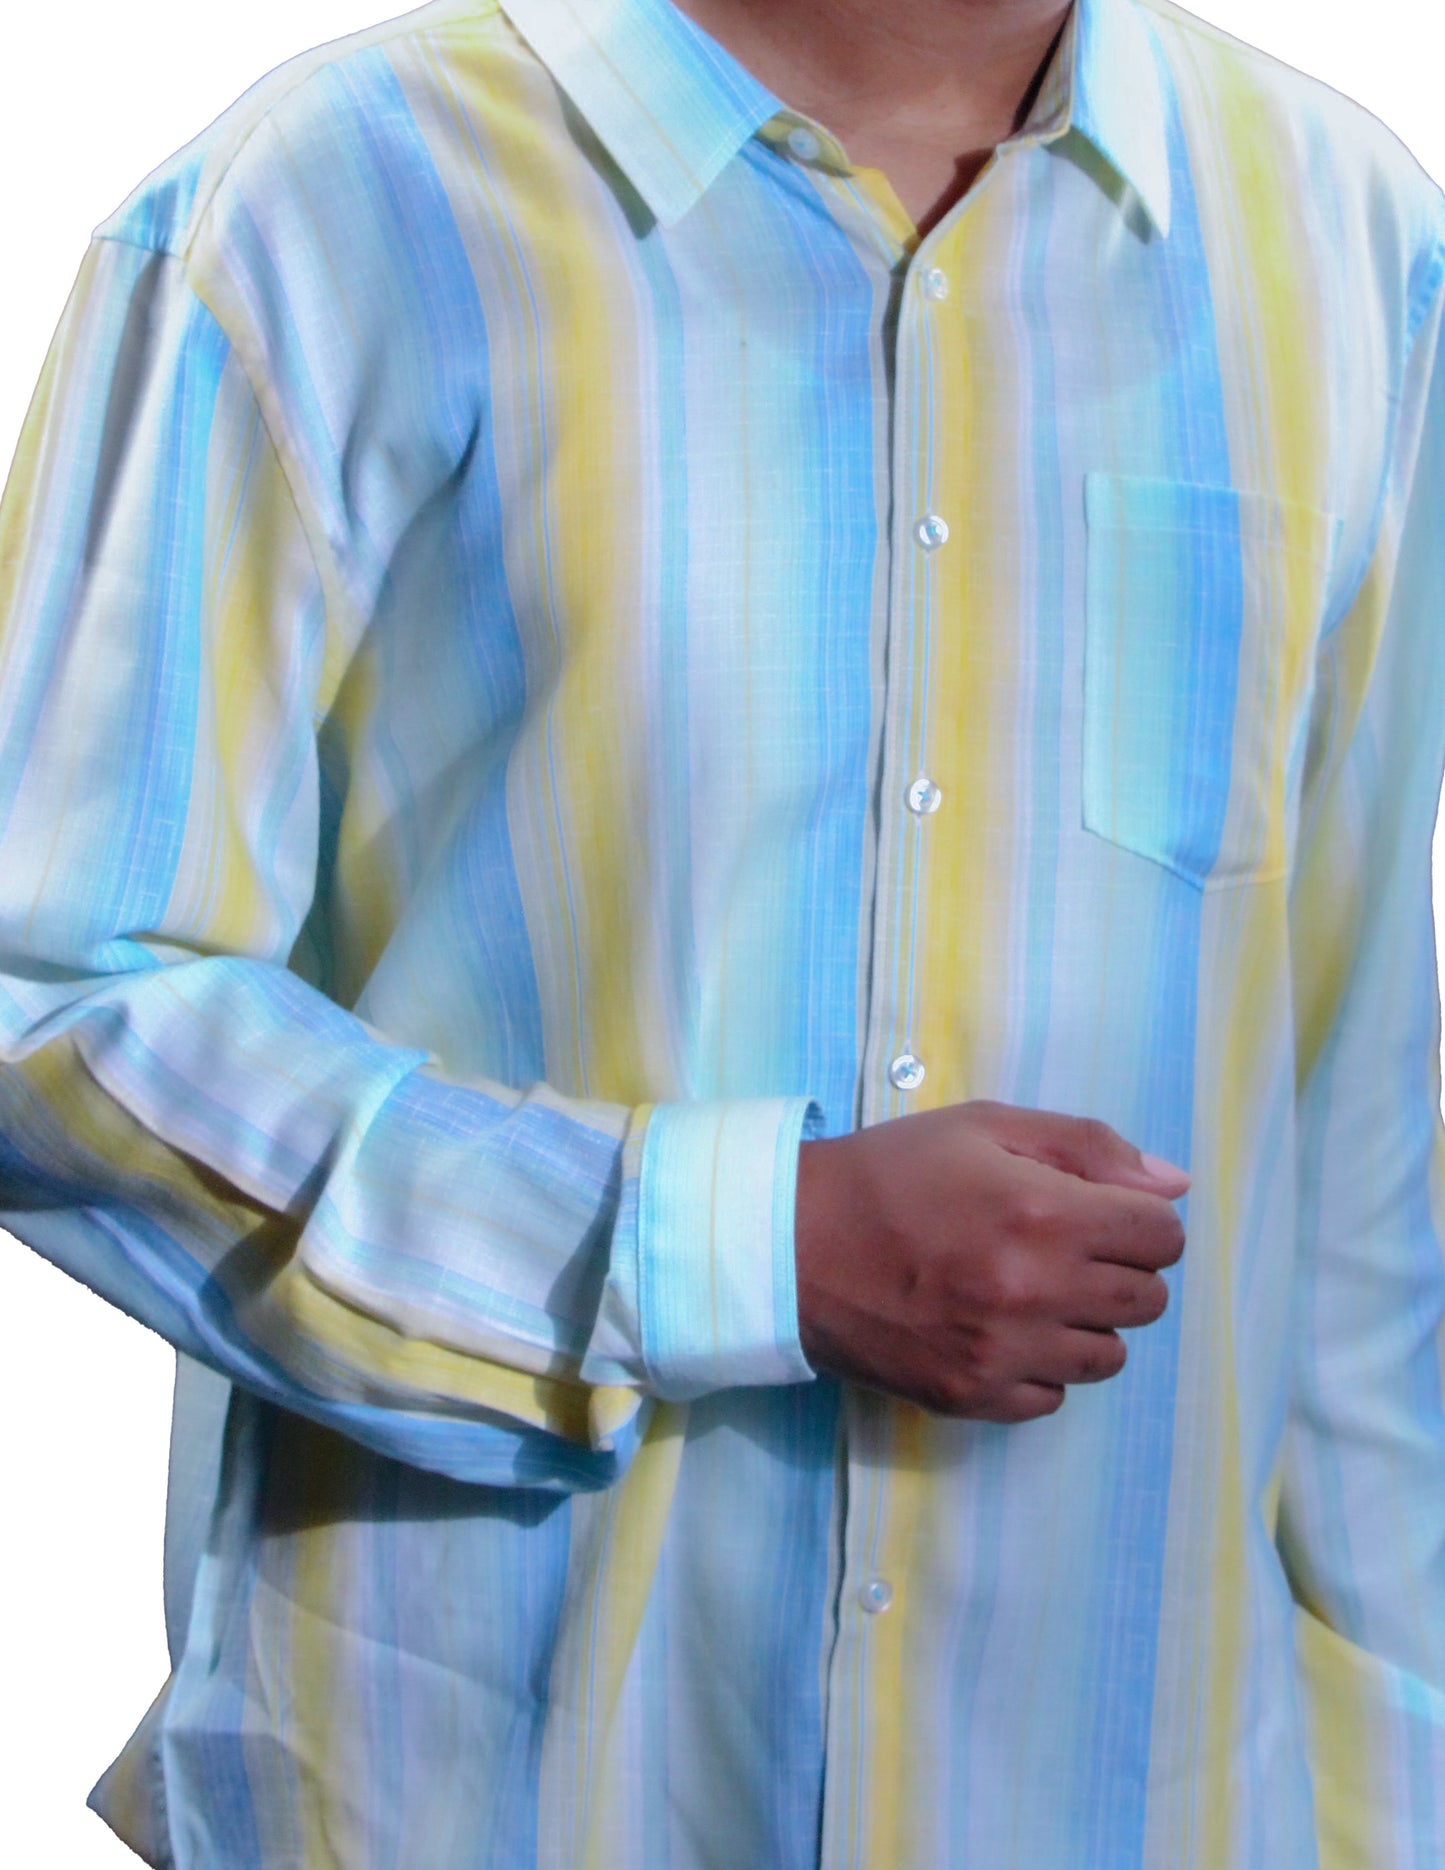 Mens Paisley & Gray Blue Yellow  Fashion Long Sleeve Shirt Button Down Blue and Yellow Striped Shirt Casual Long Sleeve Button-Down Shirts